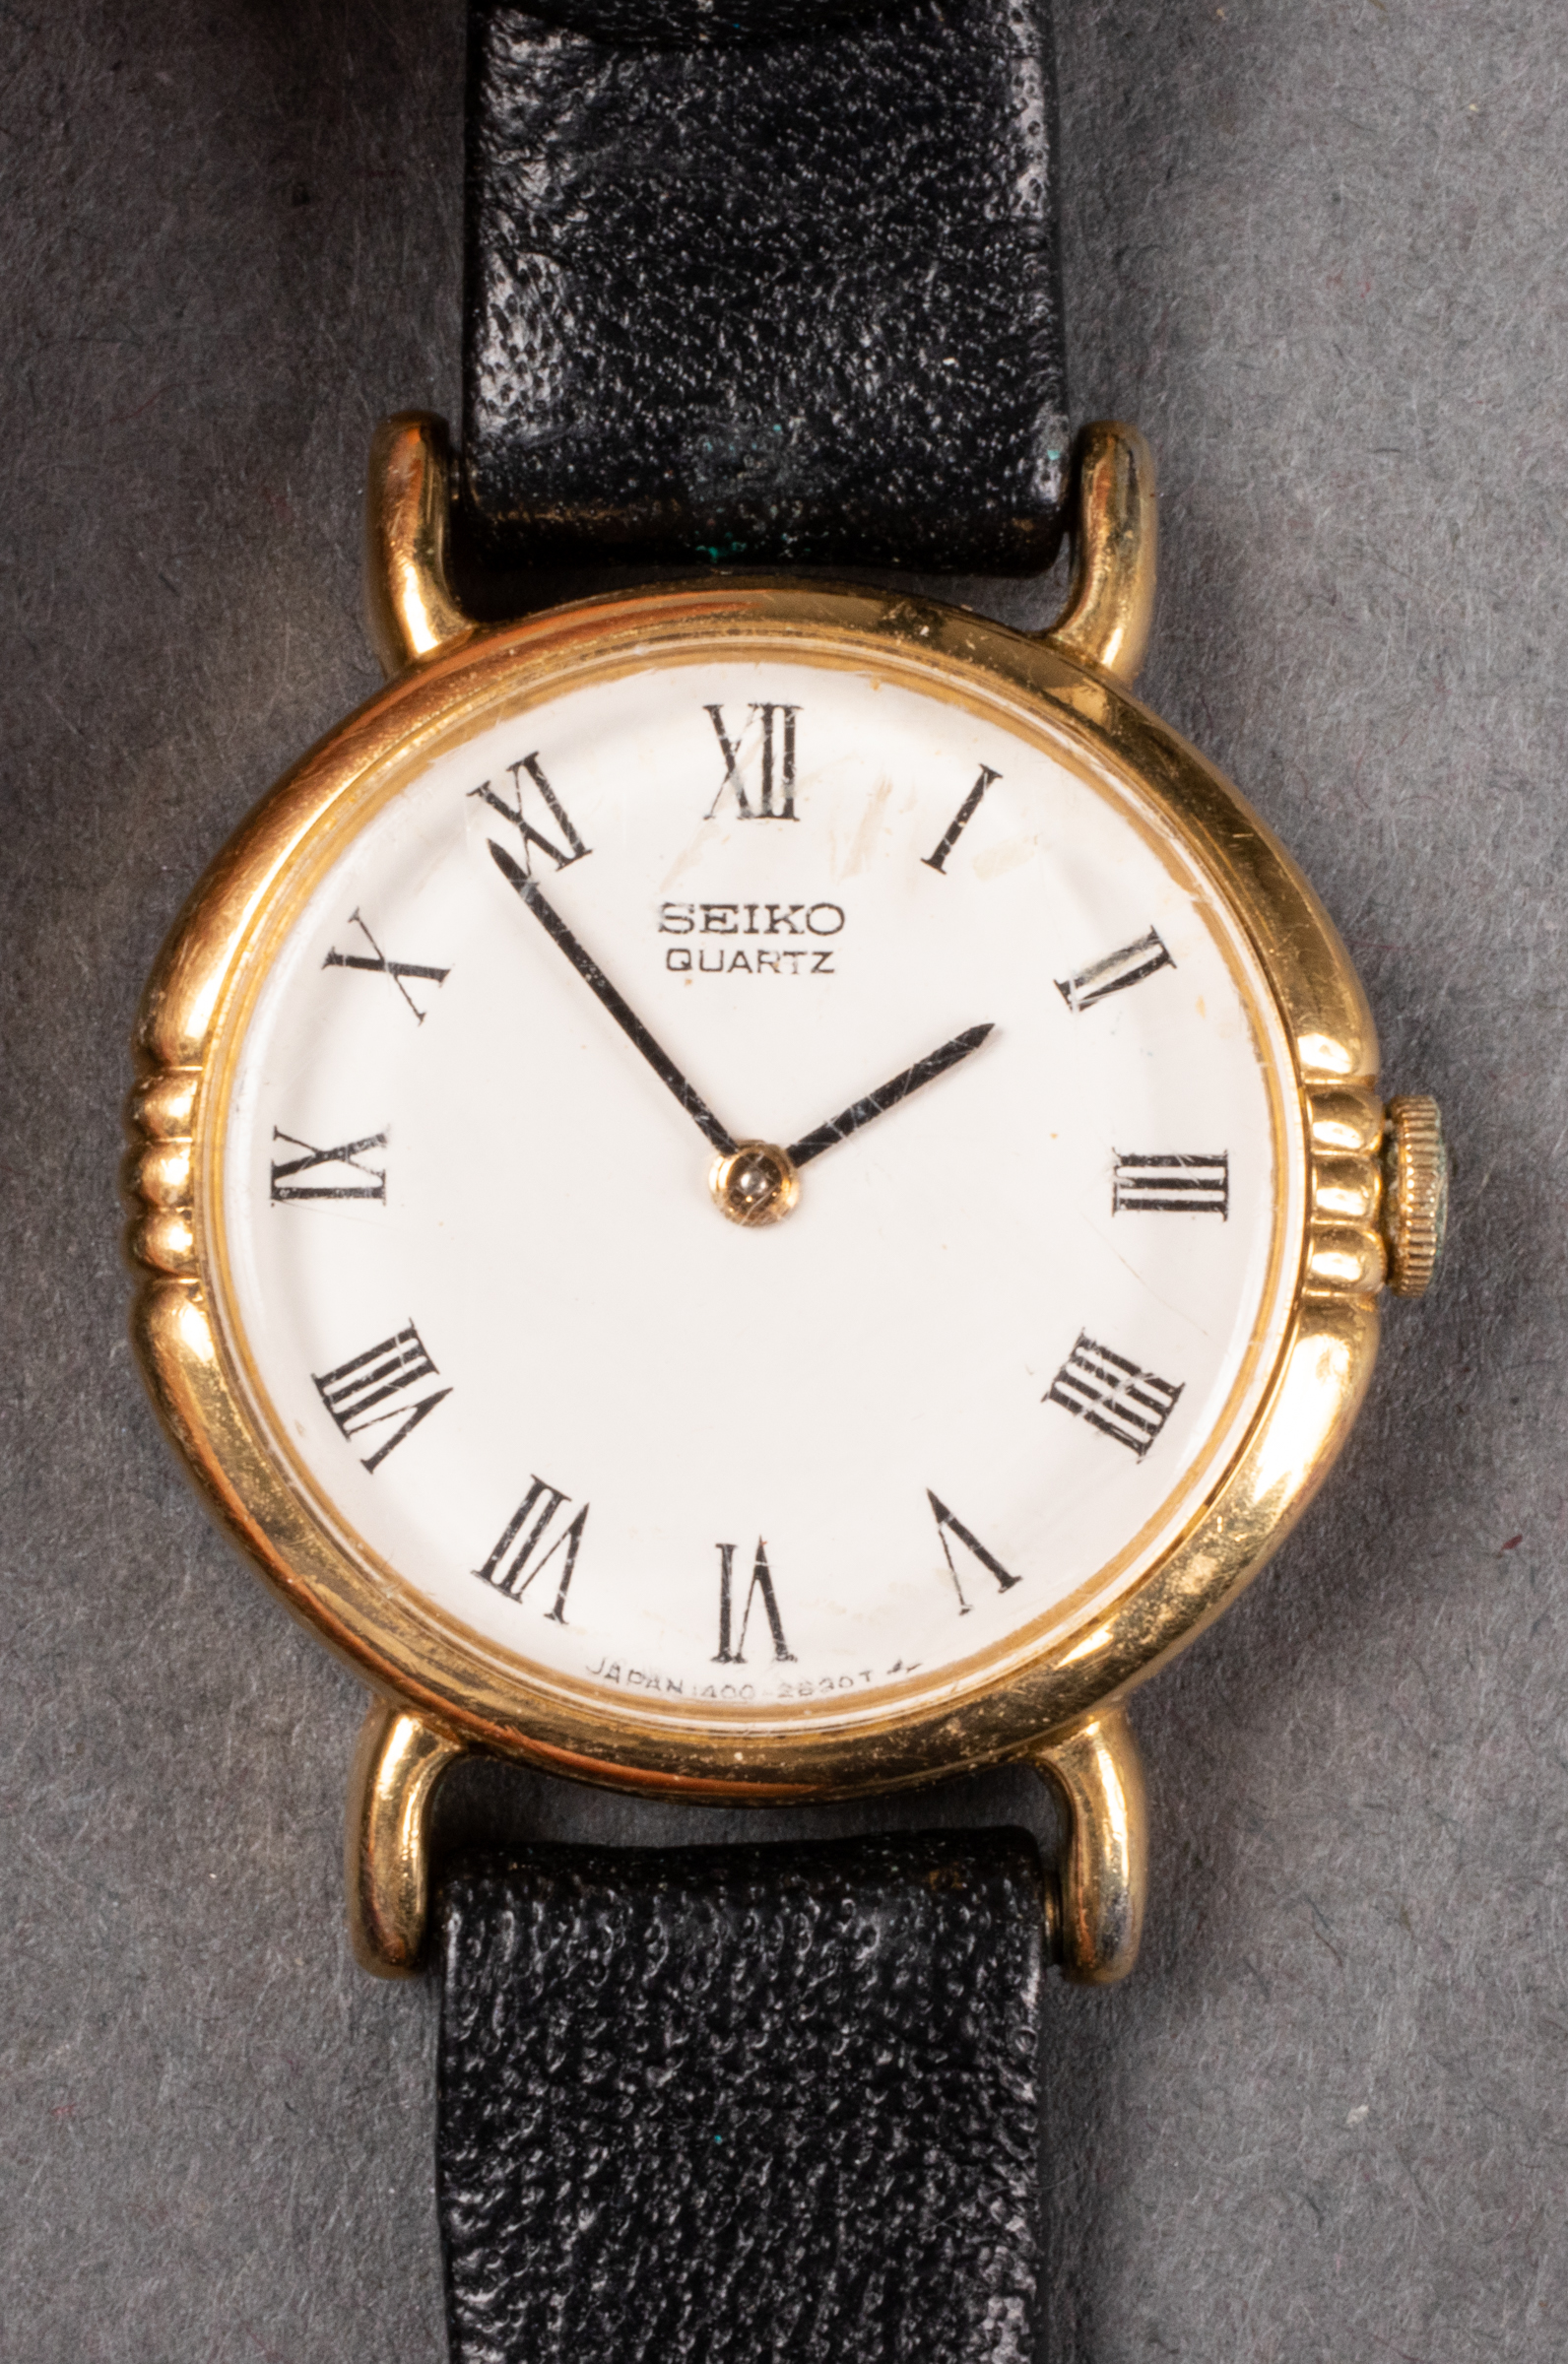 VINTAGE GOLD PLATED SEIKO WATCH